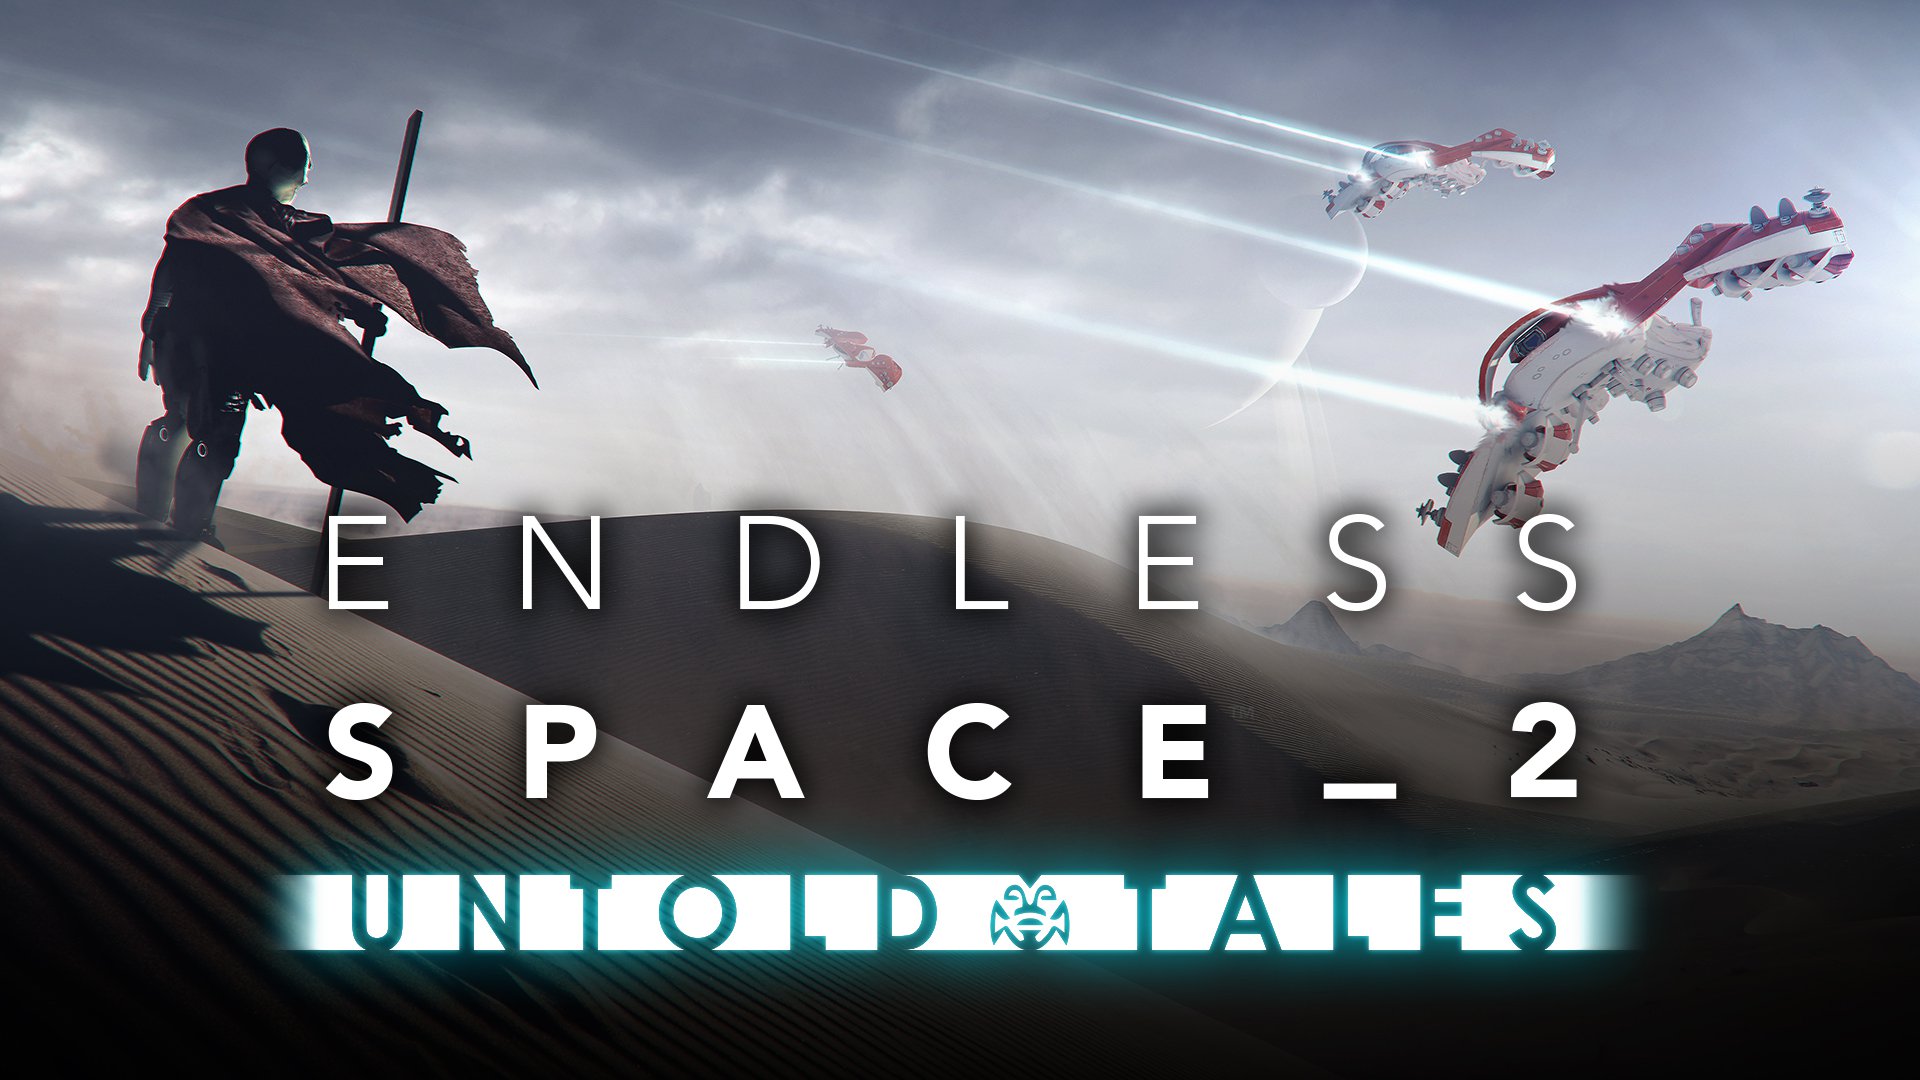 Endless Space 2 Untold Tales 1